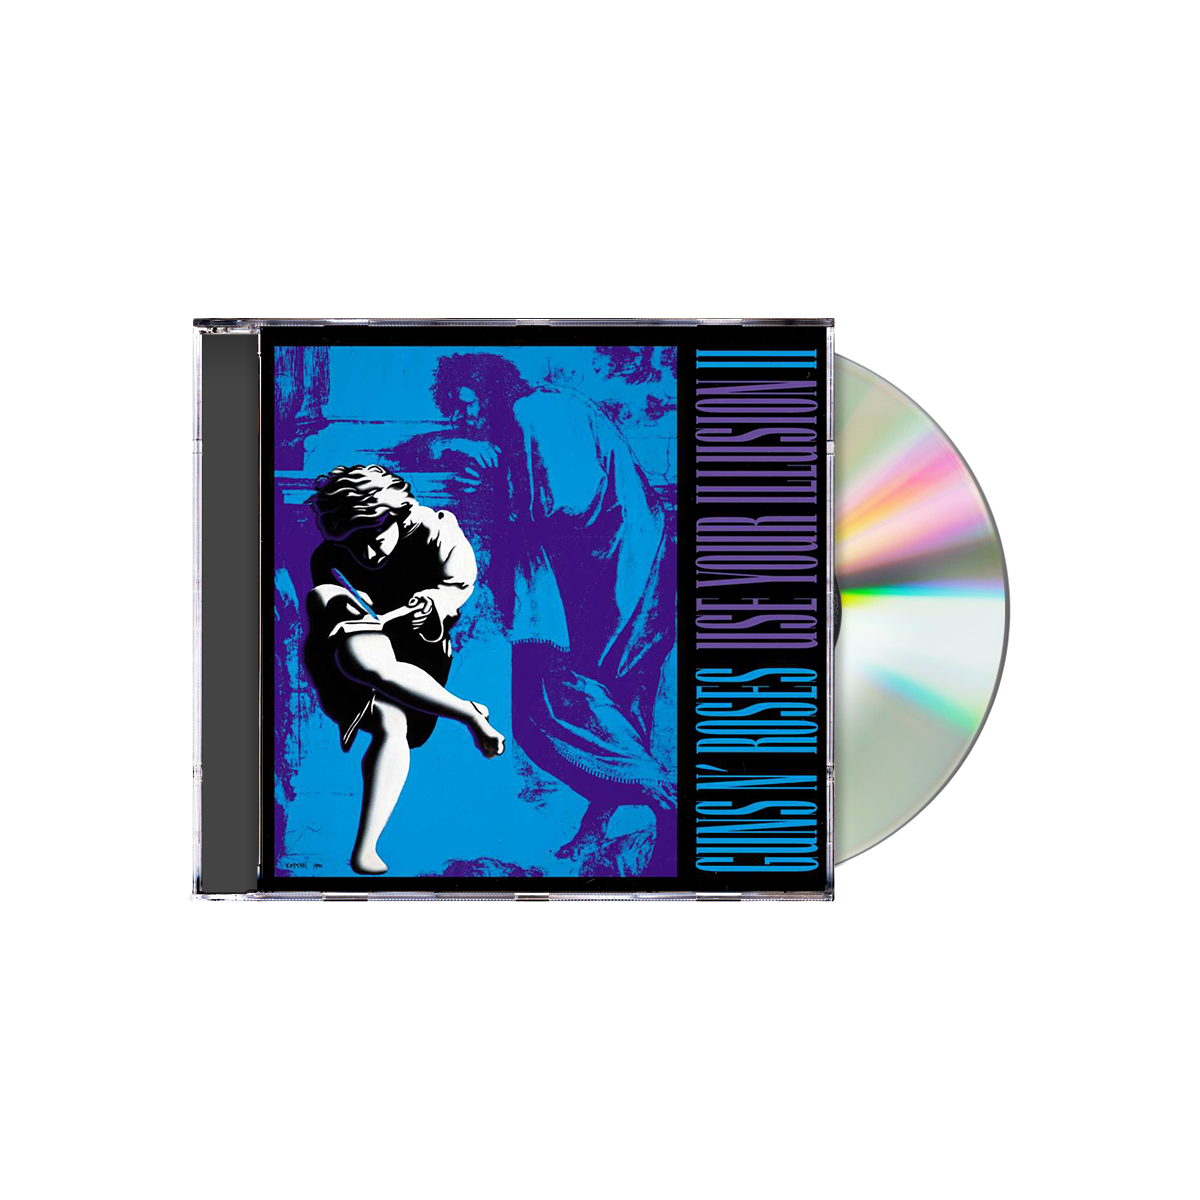 Guns N' Roses - Use Your Illusion II[Deluxe 2 CD] -  Music